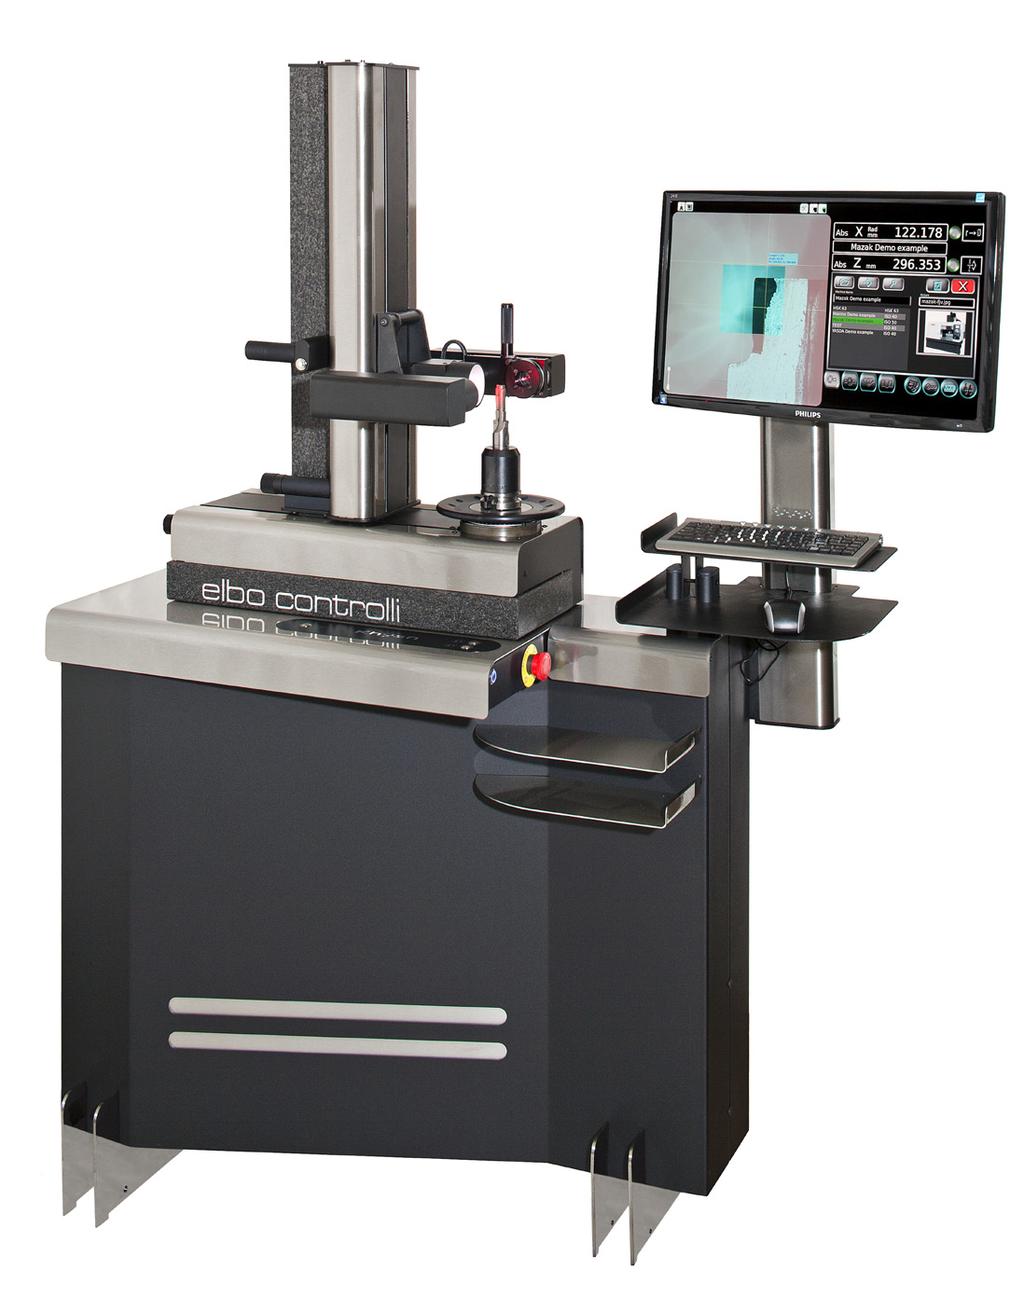 KHYAN TW - OVERVIEW KHYAN TW QUICK FACTS This tool presetting machine has been developed as a more cost effective equivalent to competitor tool inspection machines.